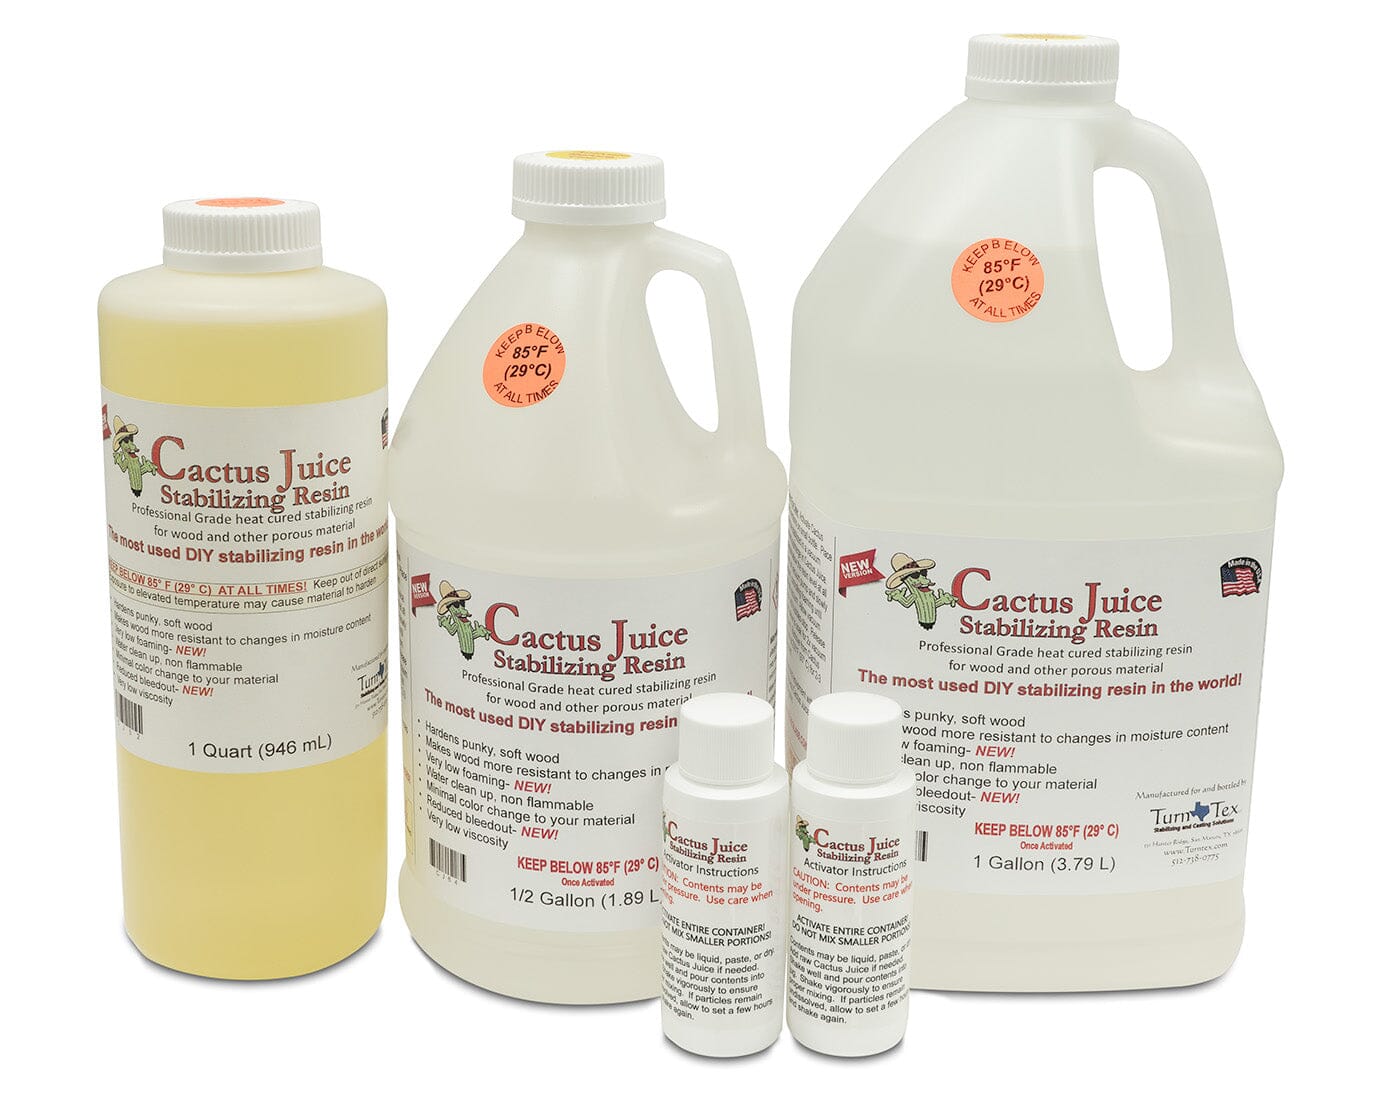 Cactus Juice Stabilizing Resin and Dyes: 1/2 Gallon (1.89 L) Cactus Juice